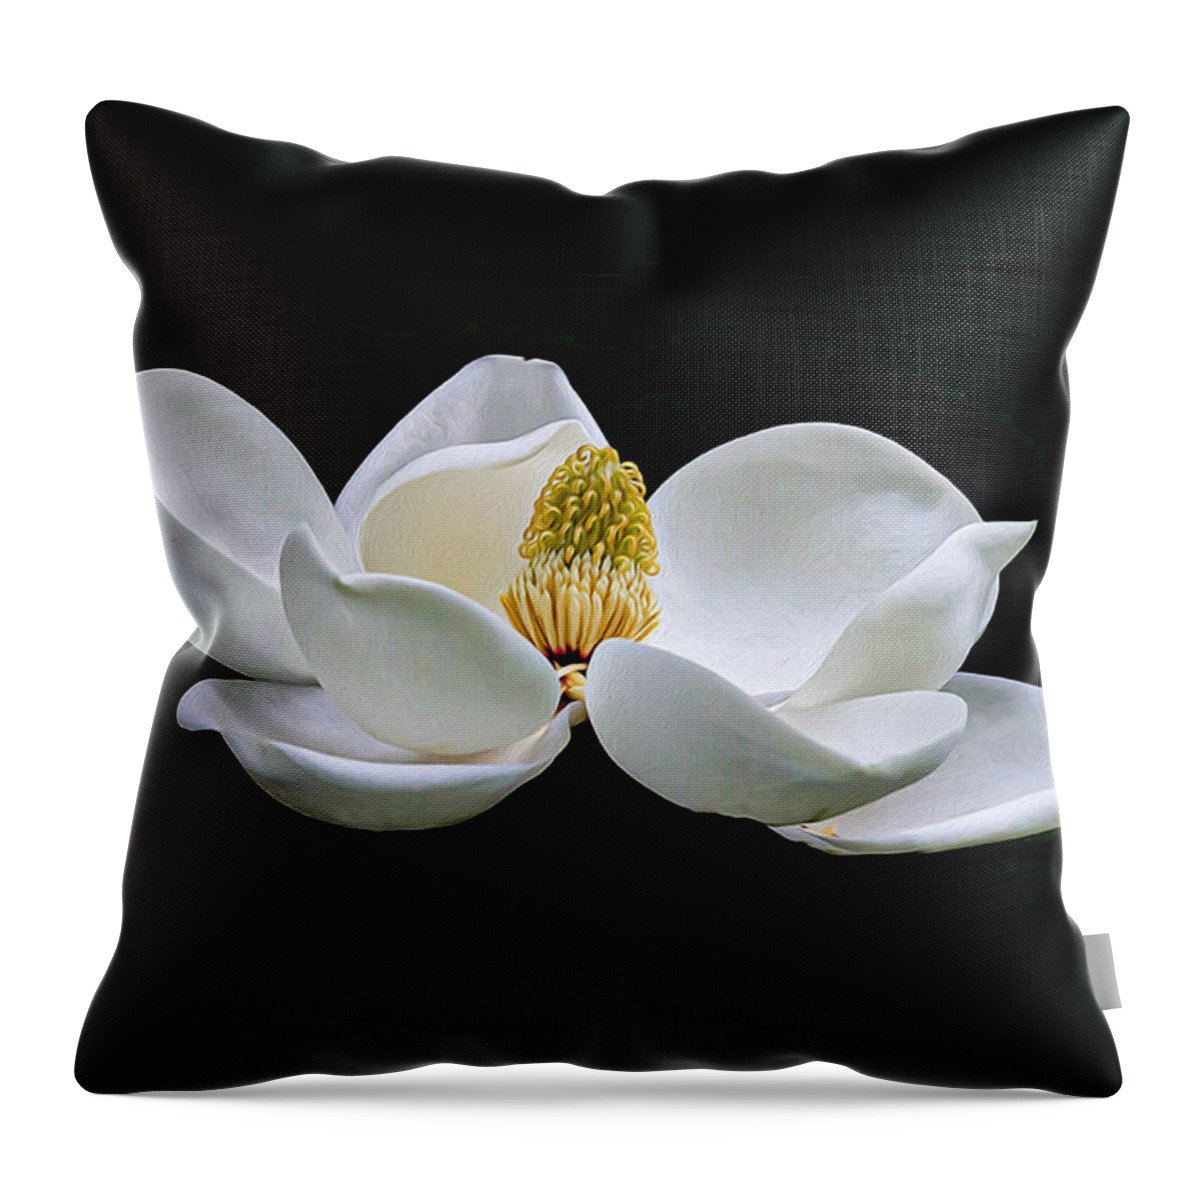 Magnolia Blossom Throw Pillow featuring the photograph Magnolia Blossom 01 OP by Jim Dollar